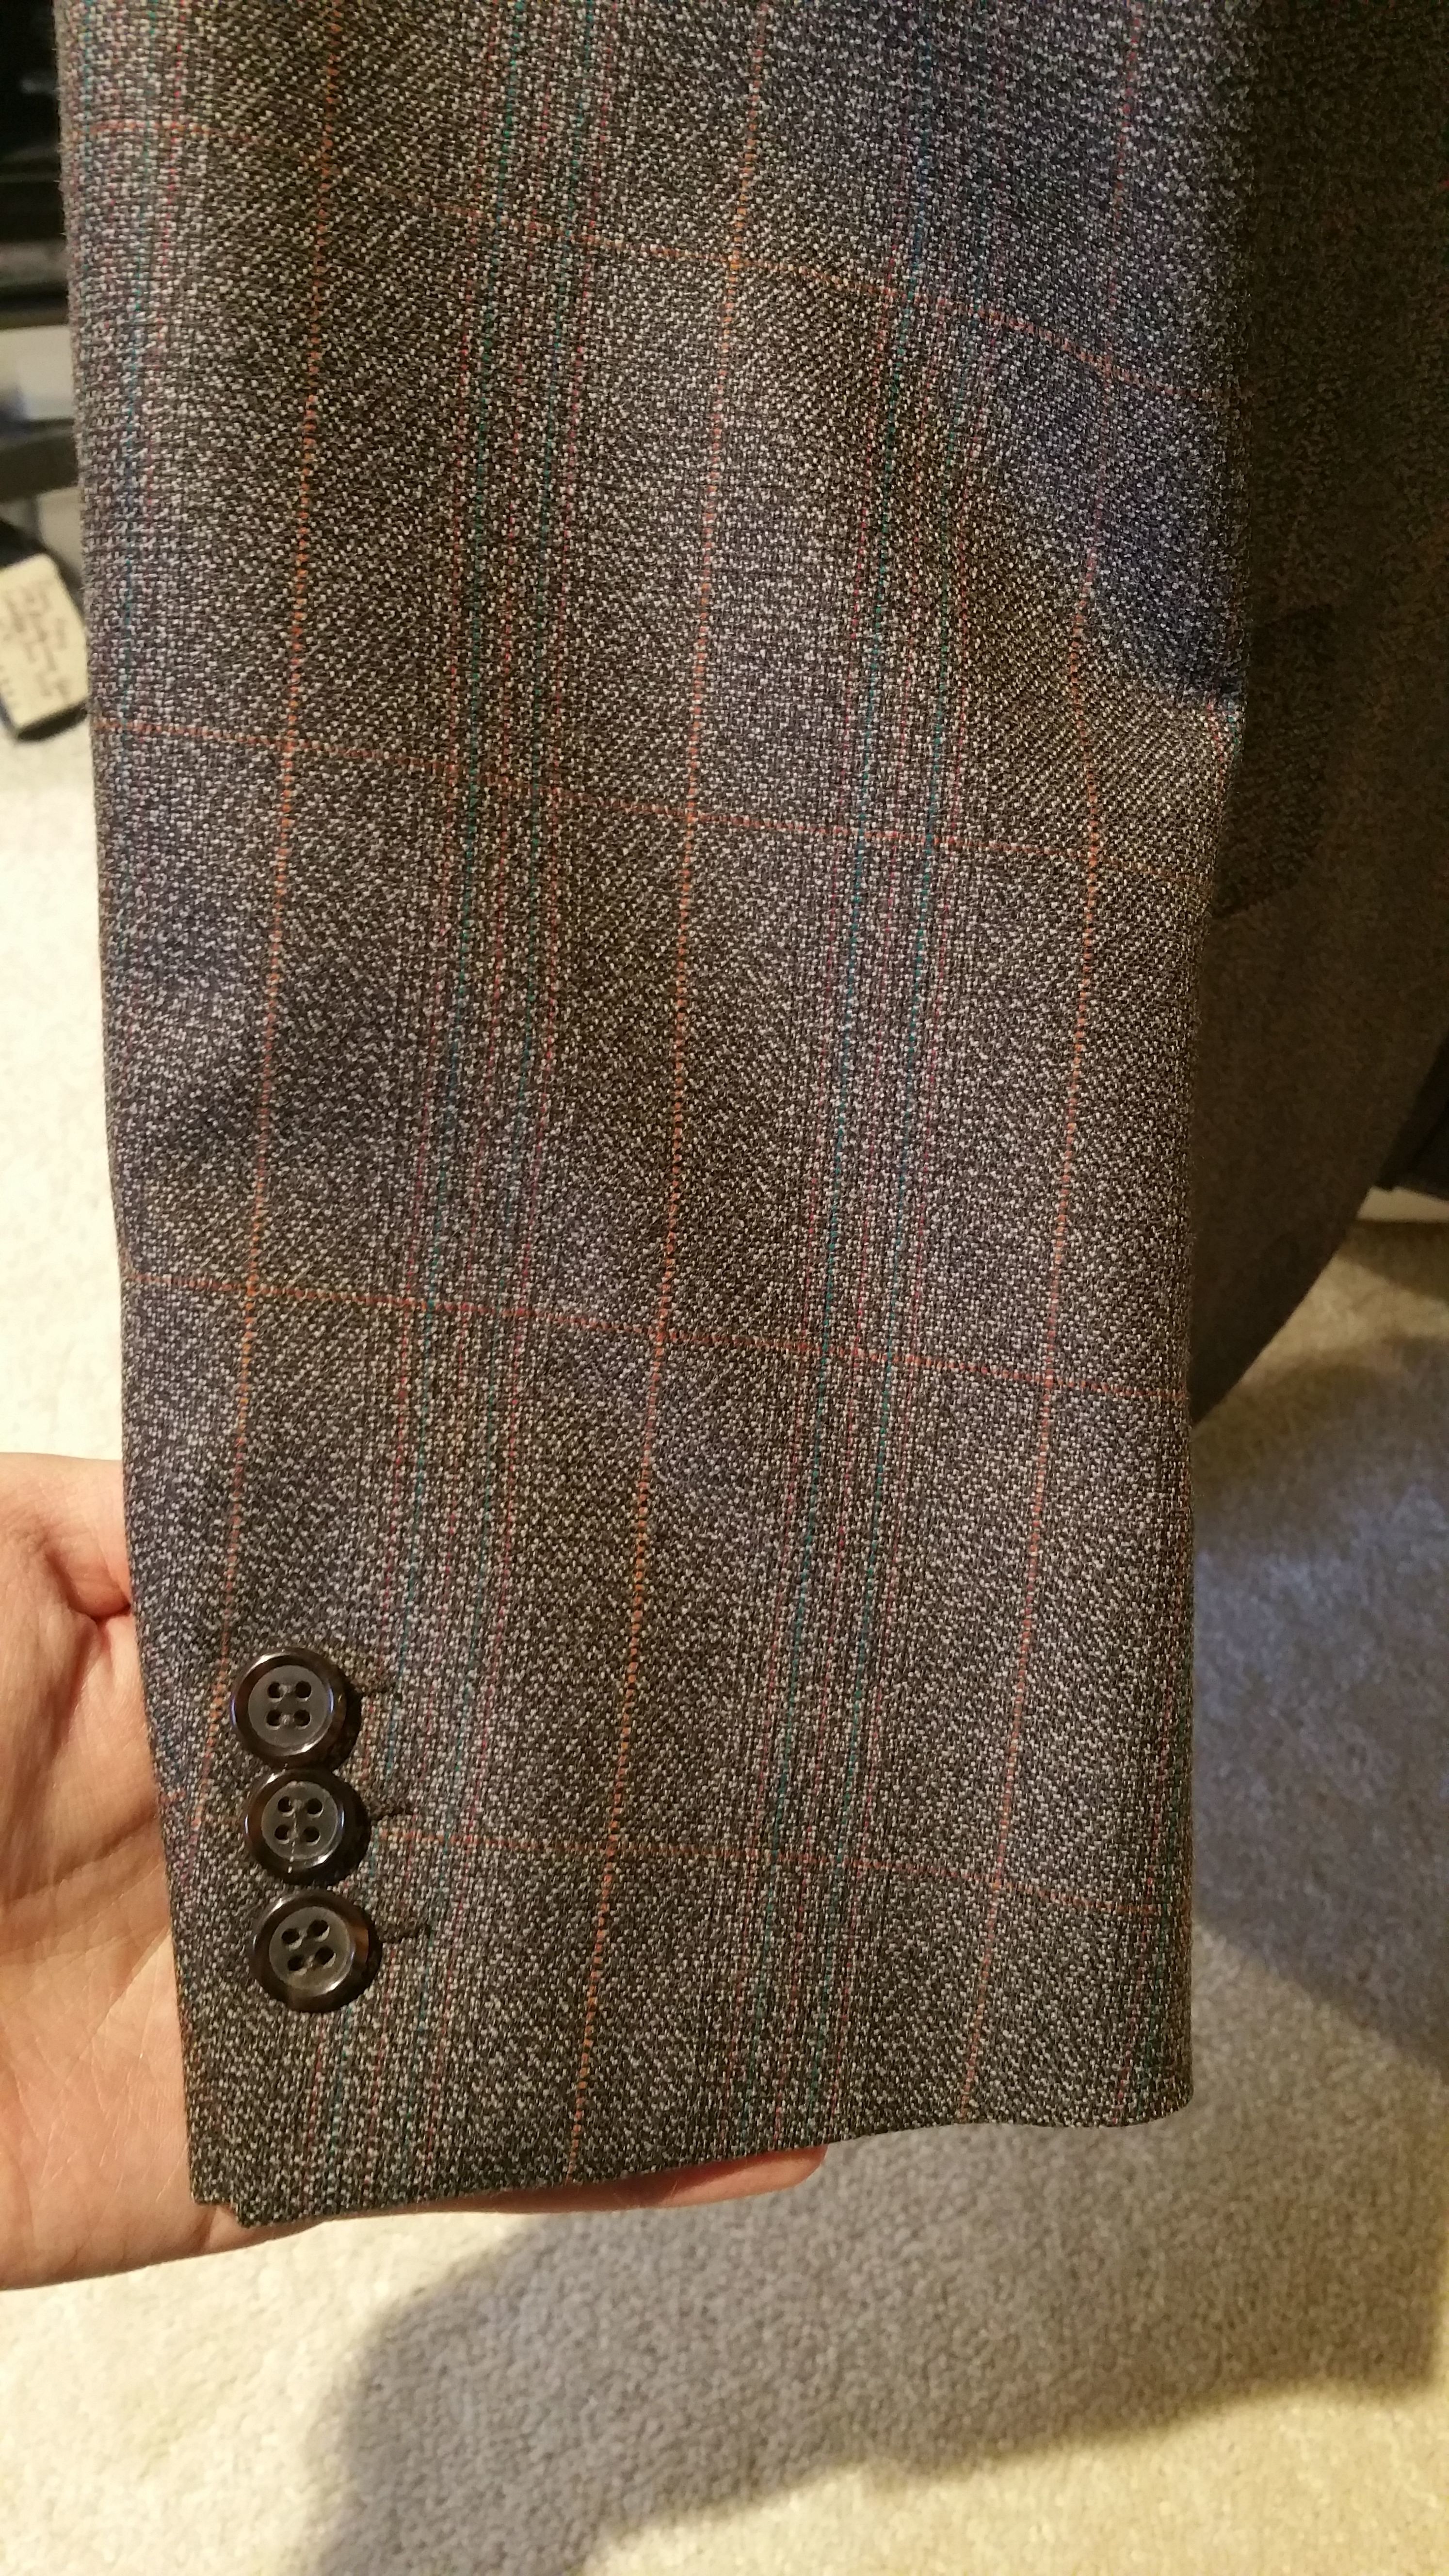 GRAIL: New Chester Barrie (Old CB) for Gieves & Hawkes Grey/Brown Tweed ...